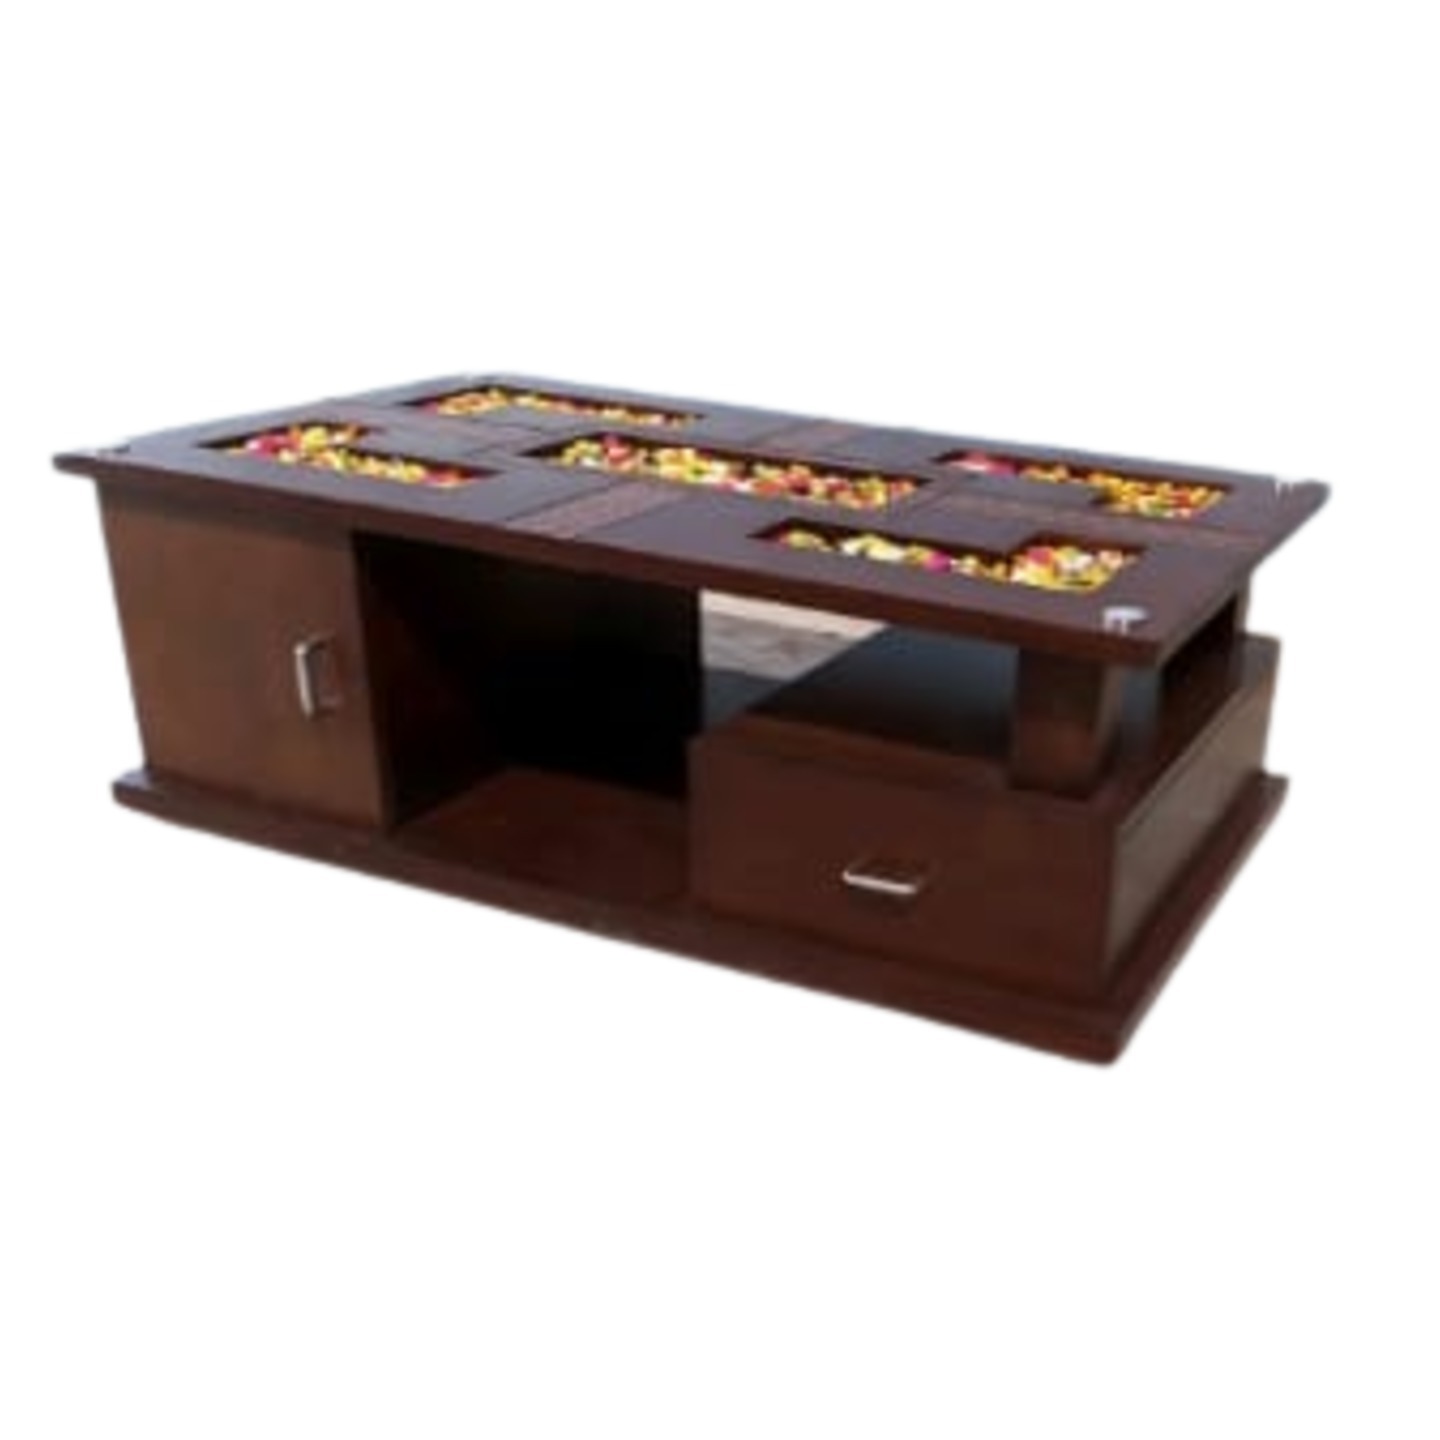 DW Center Table C-08 Chatai In 2 Drower In Brown Colour